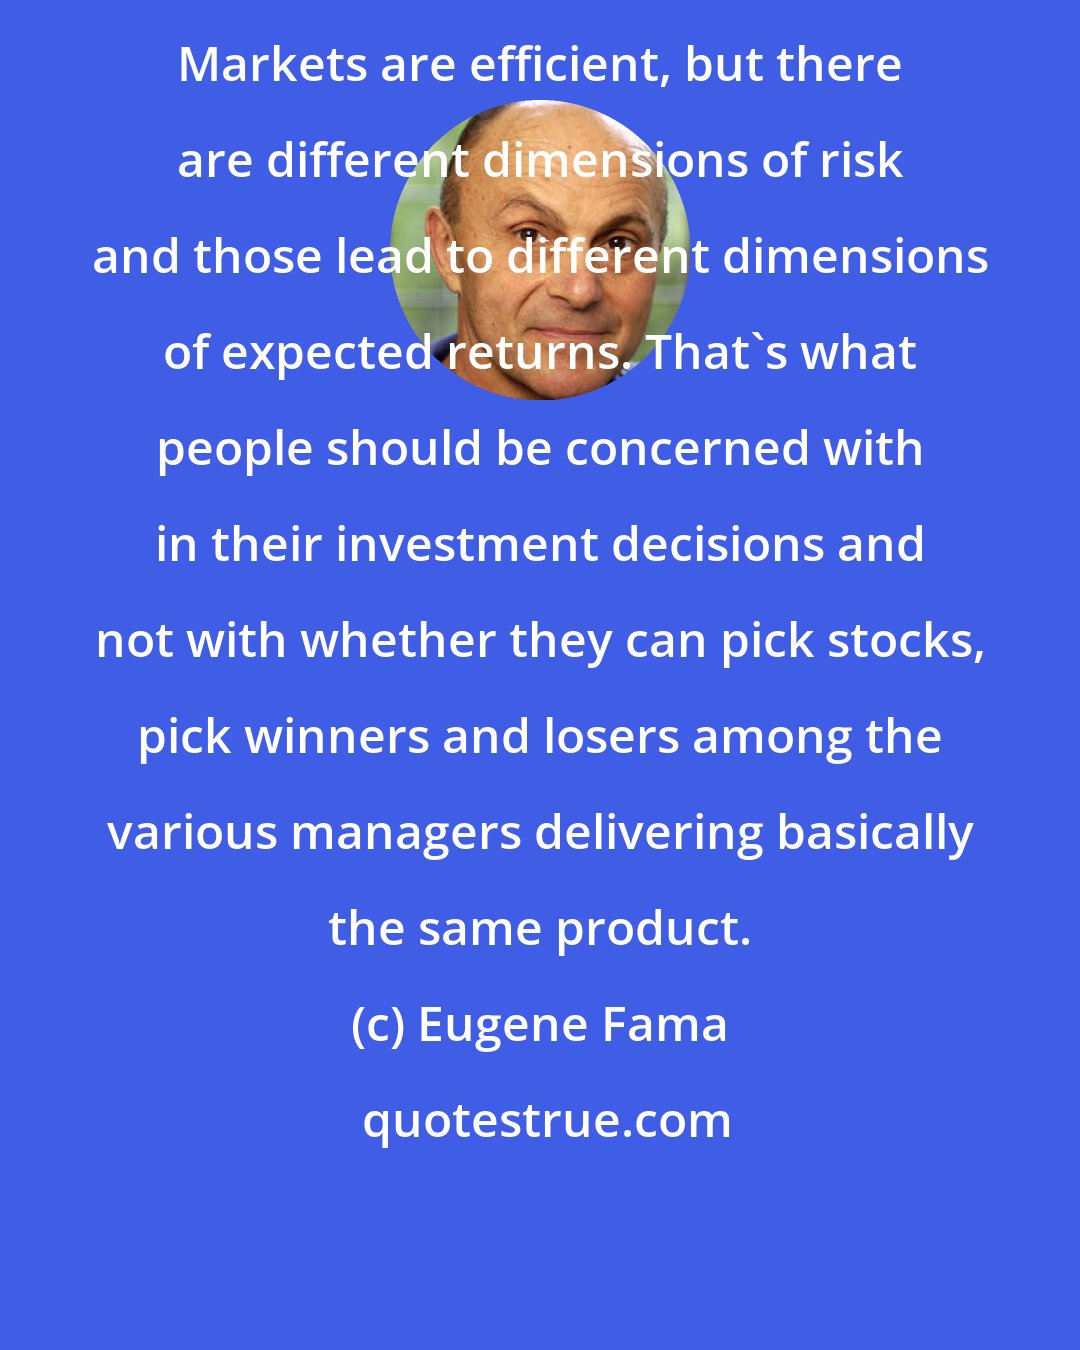 Eugene Fama: Markets are efficient, but there are different dimensions of risk and those lead to different dimensions of expected returns. That's what people should be concerned with in their investment decisions and not with whether they can pick stocks, pick winners and losers among the various managers delivering basically the same product.